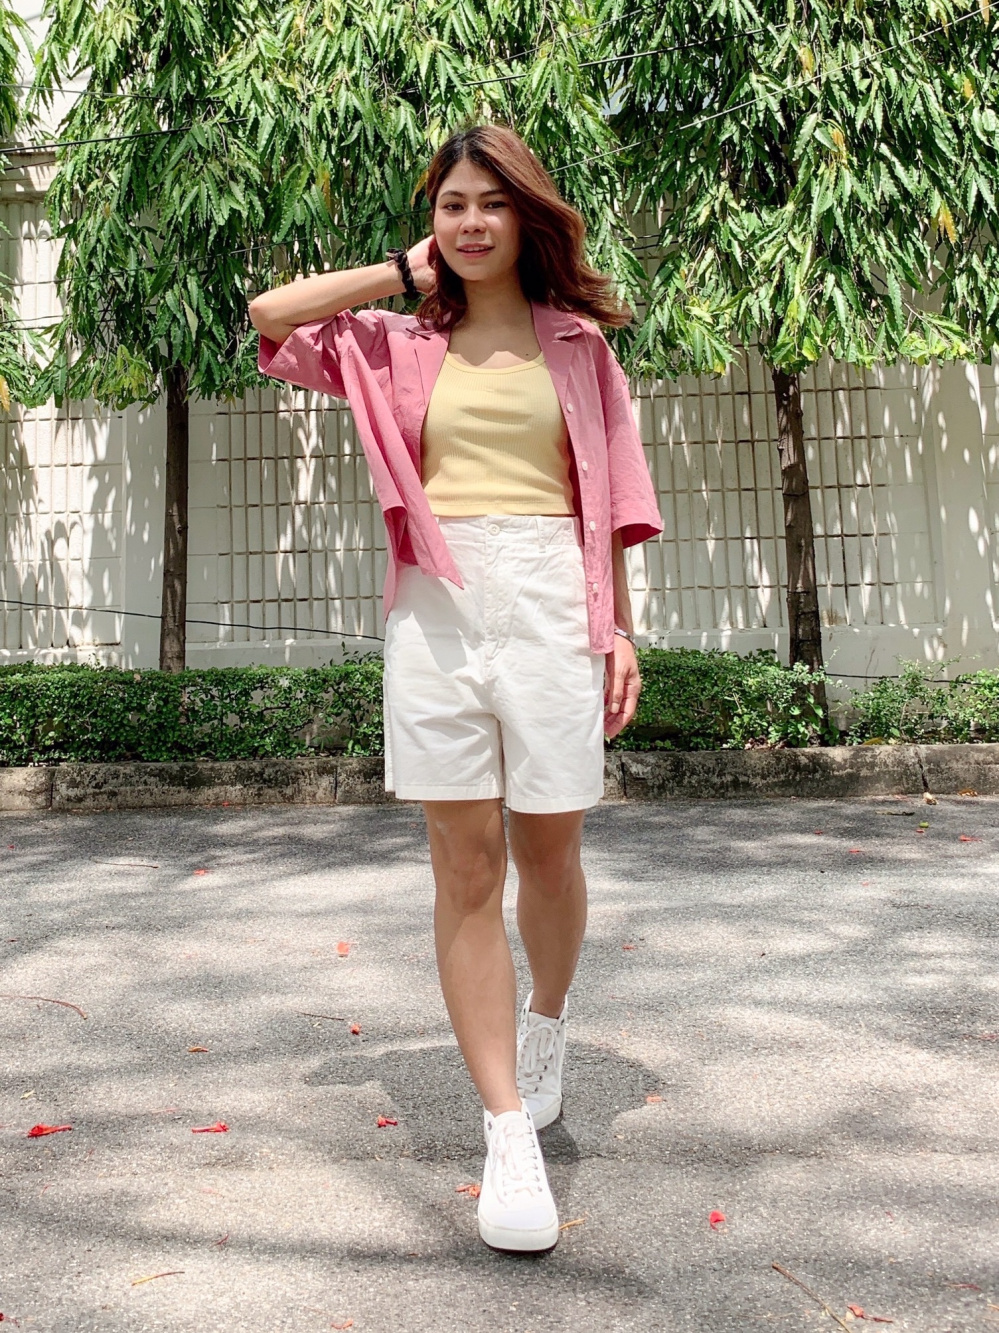 Check styling ideas for「AIRism Bra Sleeveless Top、Chino Shorts」